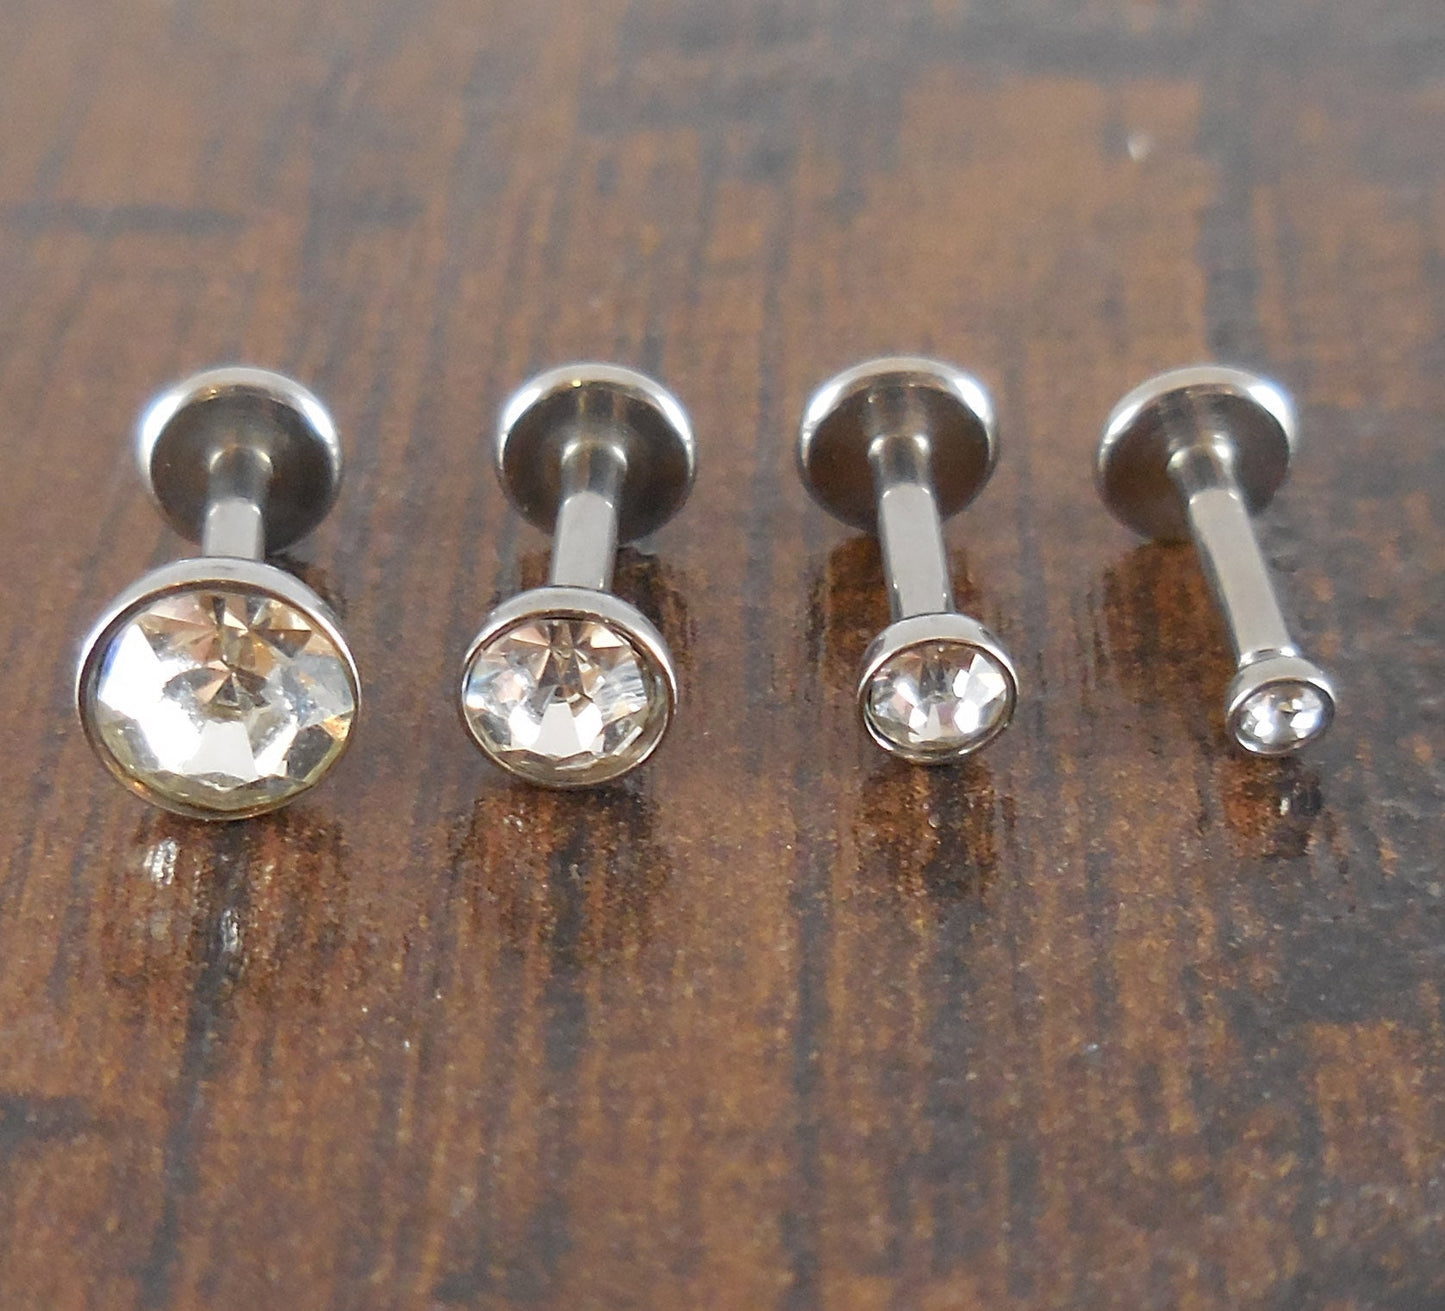 16g 2, 3, 4 or 5mm Clear Cubic Zirconia 6mm or 8mm Thread less Push Pin Triple Forward Stainless Helix Earring Cartilage Labret Nose Ring